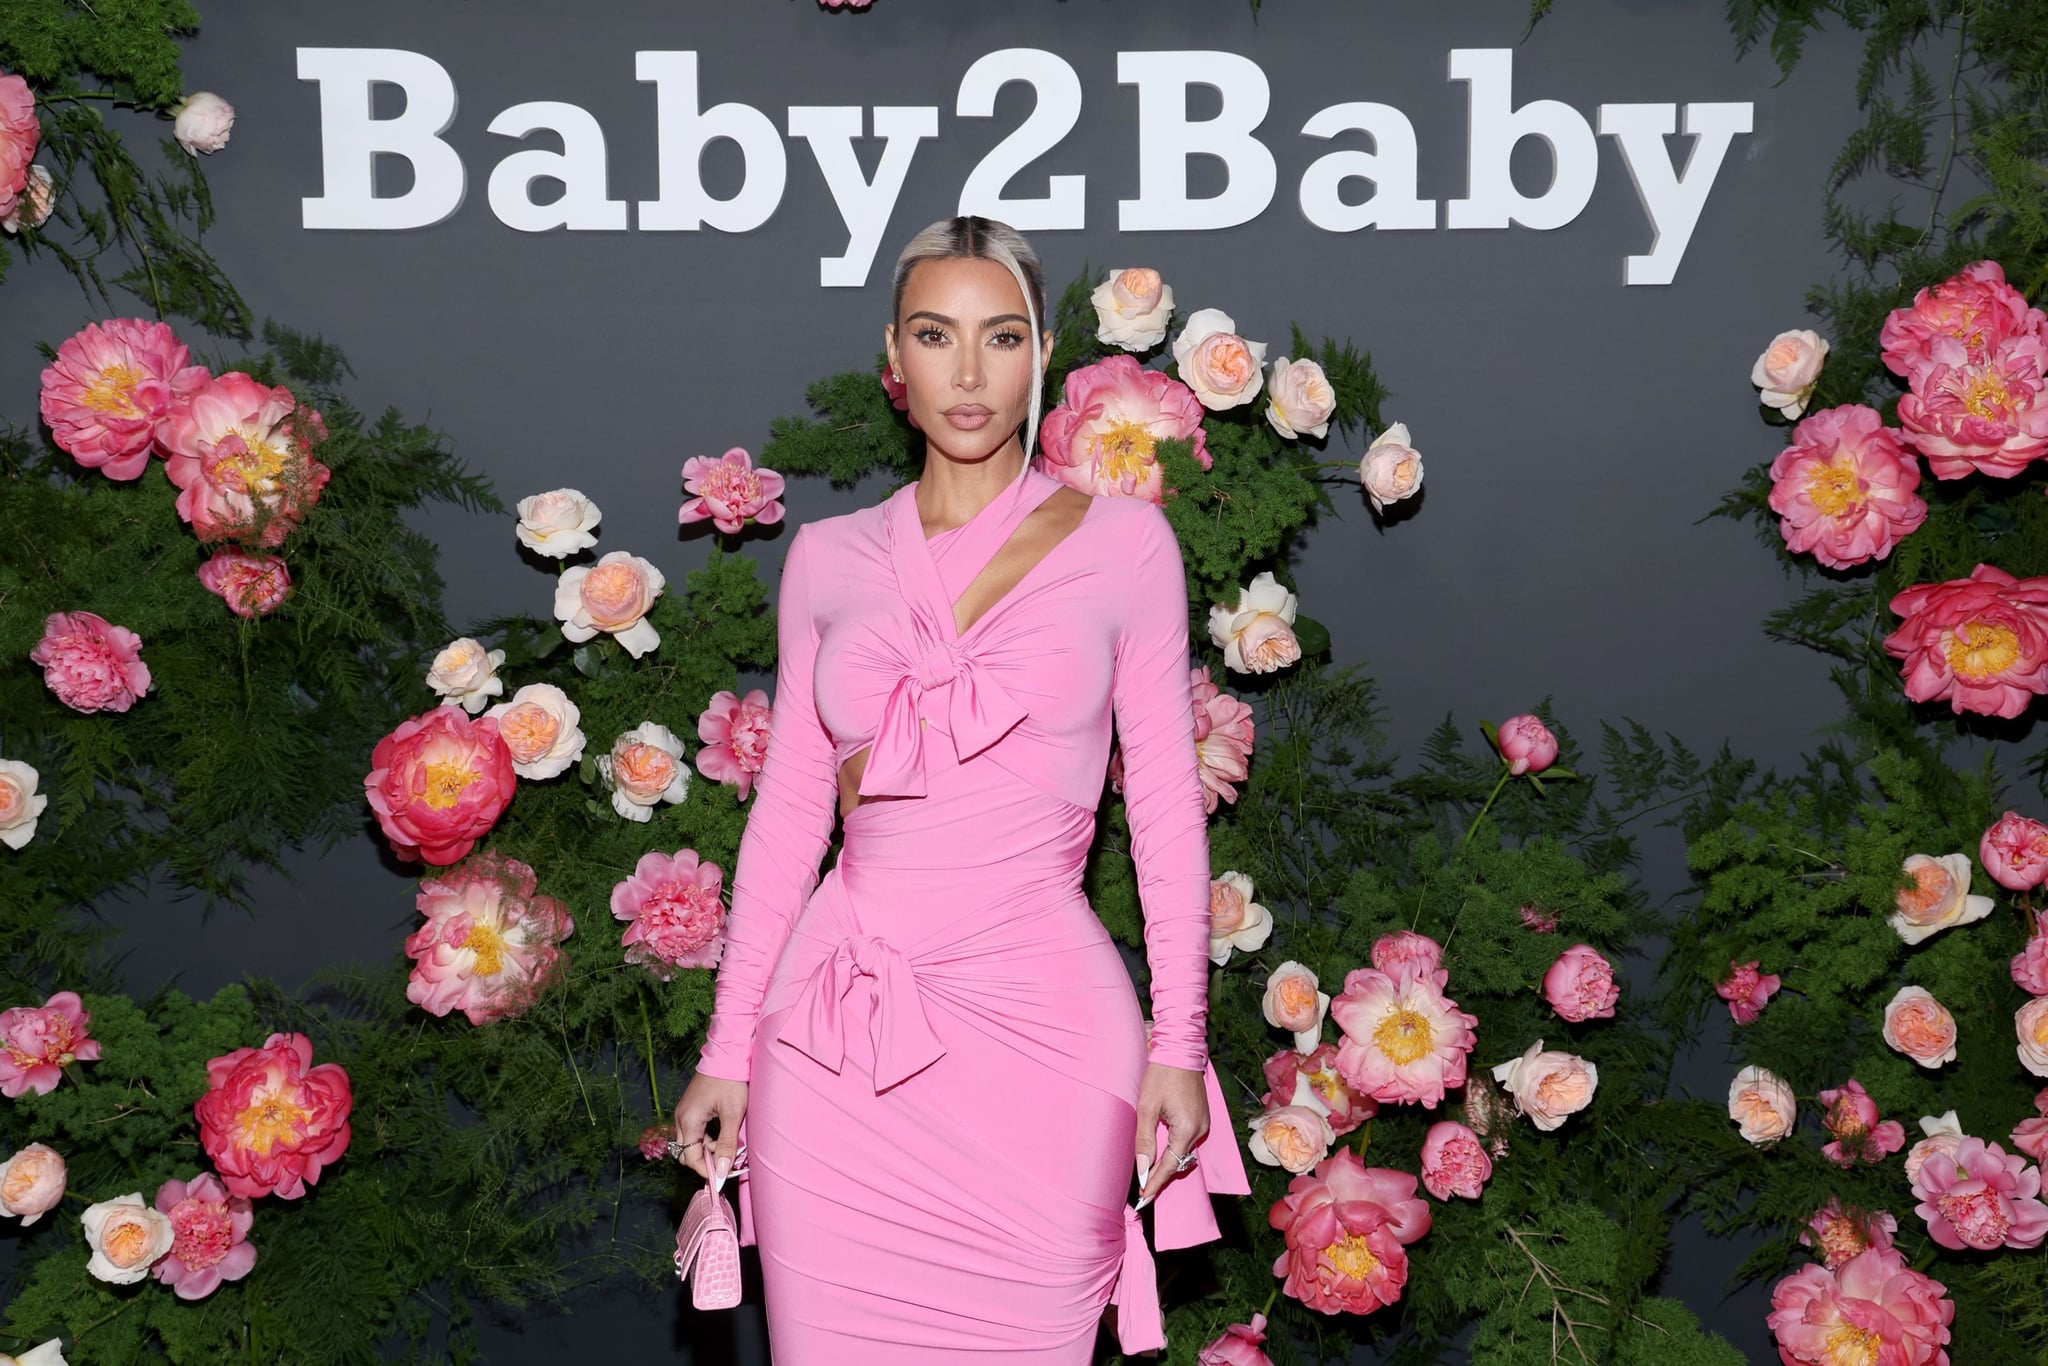 WEST HOLLYWOOD, CALIFORNIA - NOVEMBER 12: Kim Kardashian uczestniczy w 2022 Baby2Baby Gala presented by Paul Mitchell at Pacific Design Center 12 listopada 2022 roku w West Hollywood, Kalifornia. (Photo by Phillip Faraone/Getty Images for Baby2Baby)